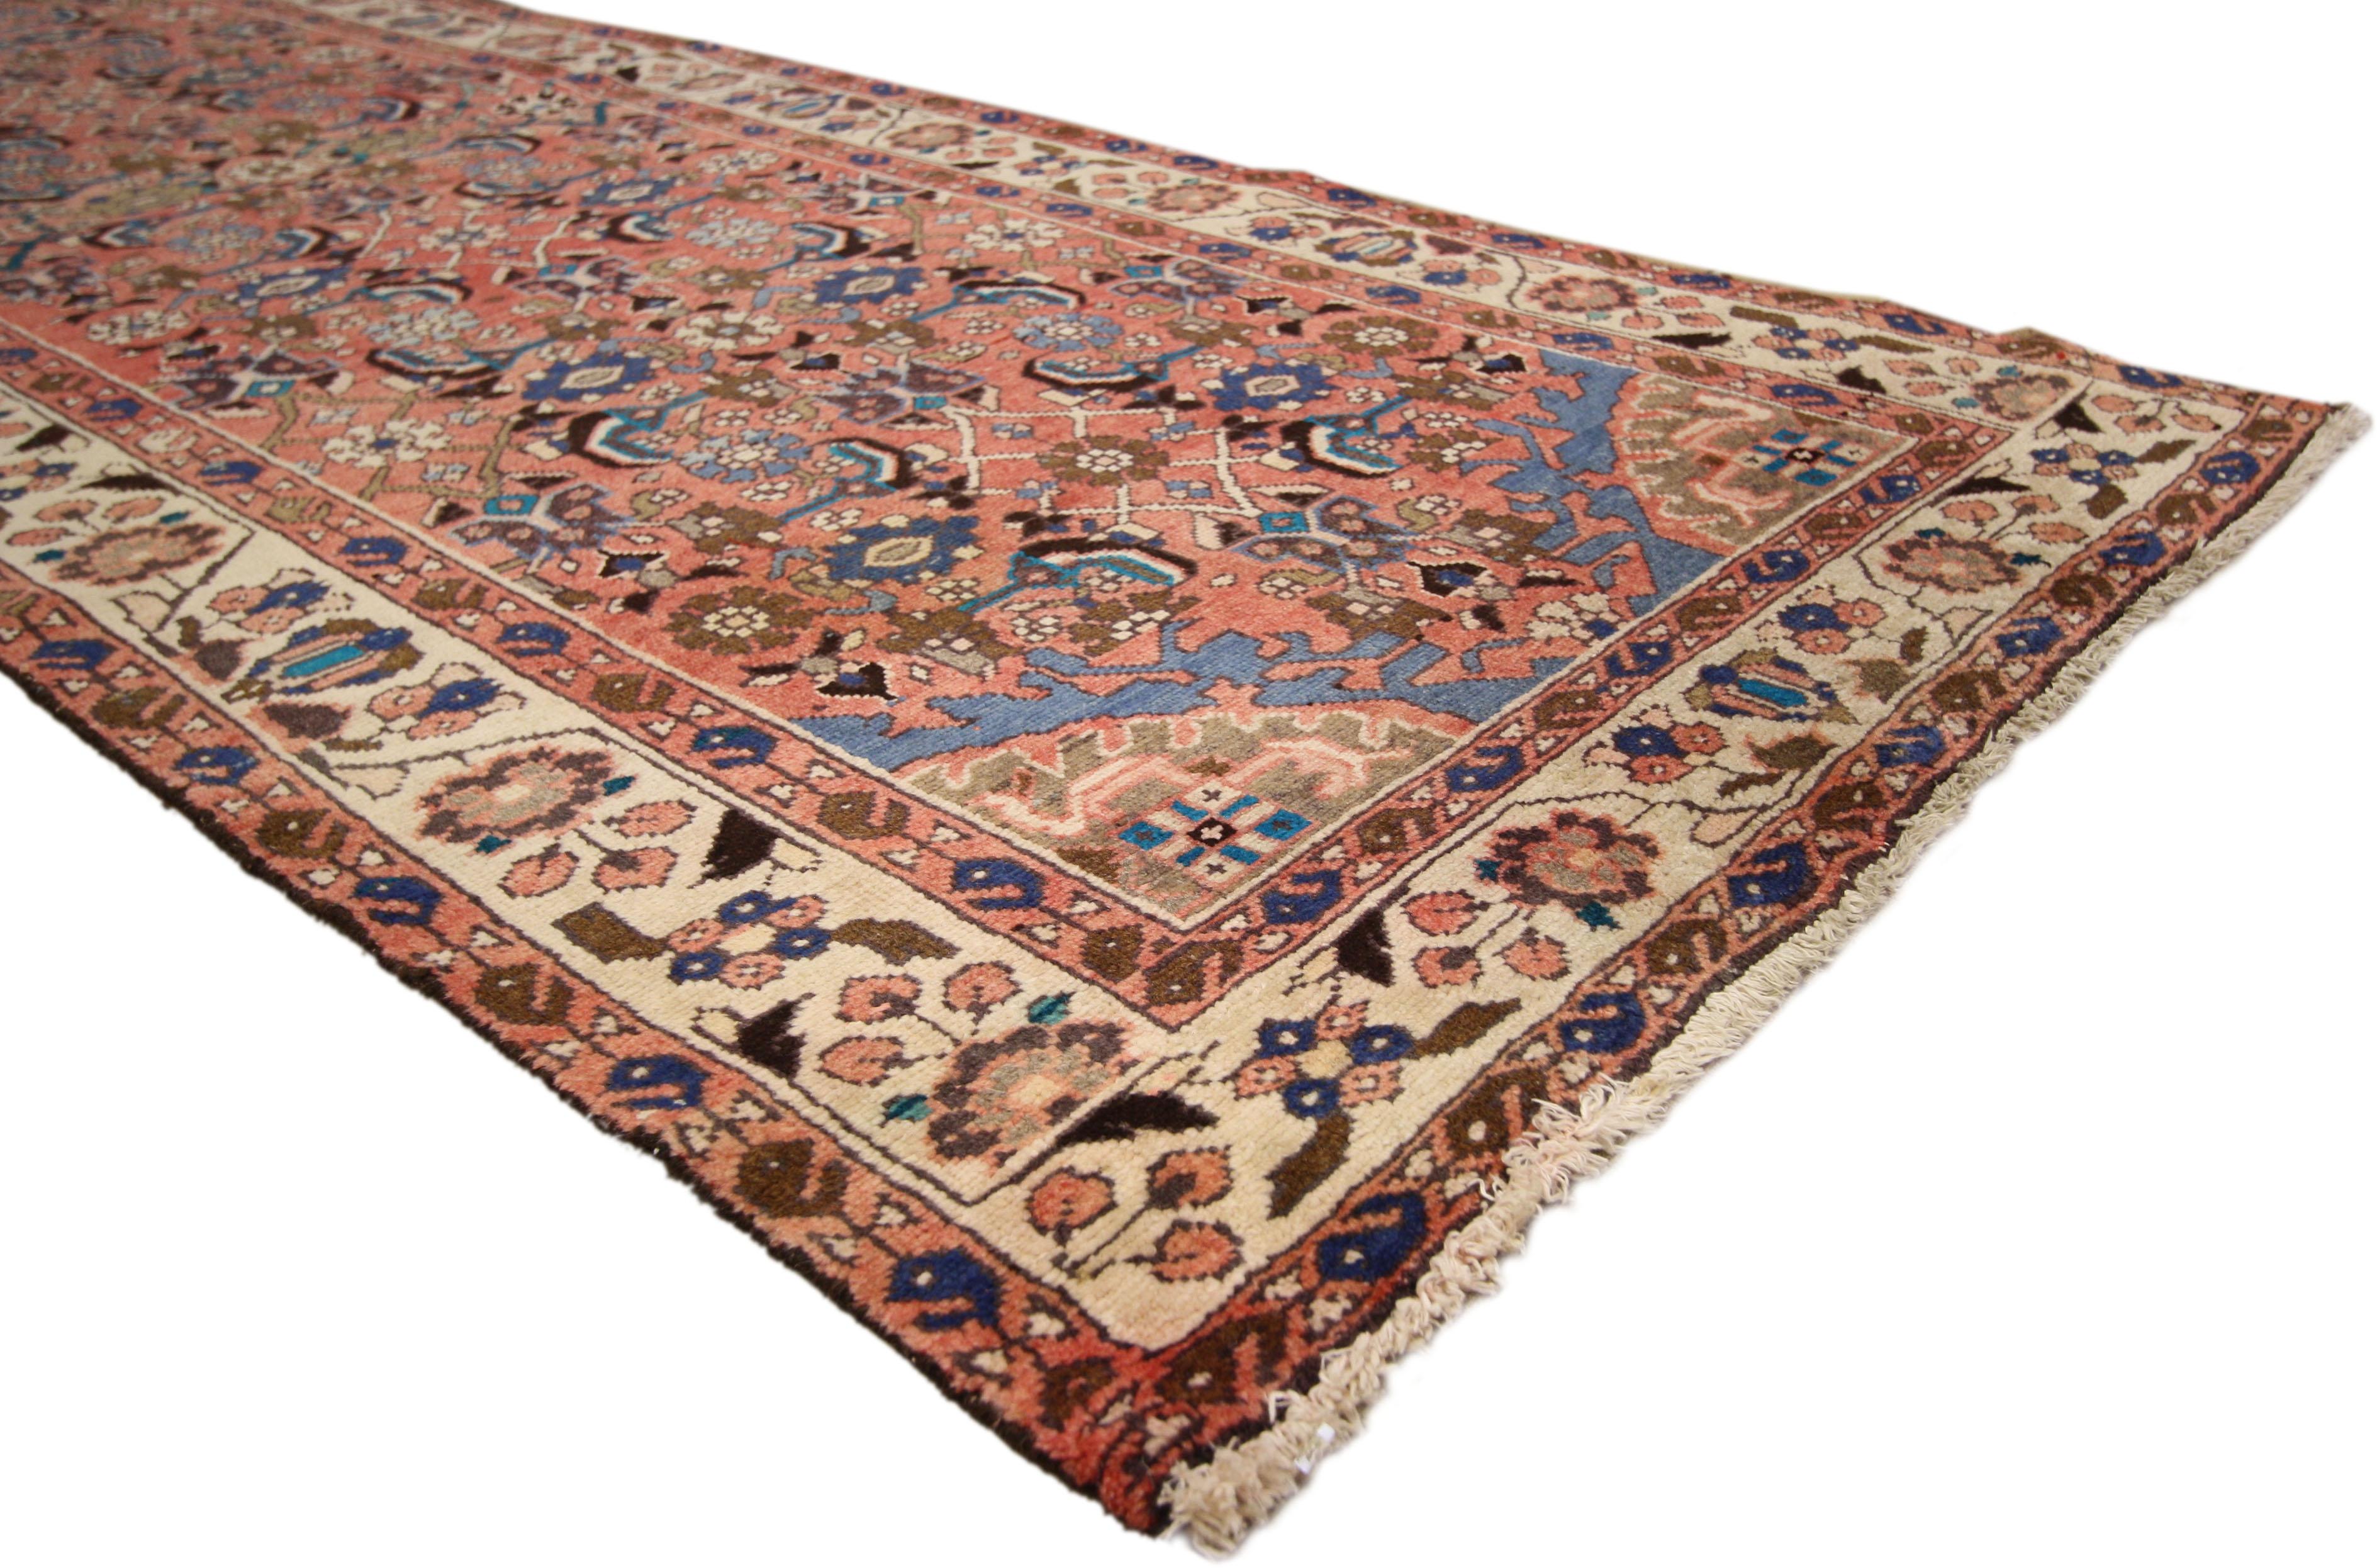 74306, vintage Persian Malayer runner, hallway runner. This hand-knotted wool vintage Persian Malayer runner features a lively all-over Herati pattern on an abrashed field. The richness and variety of motifs employed give the carpet runner’s central